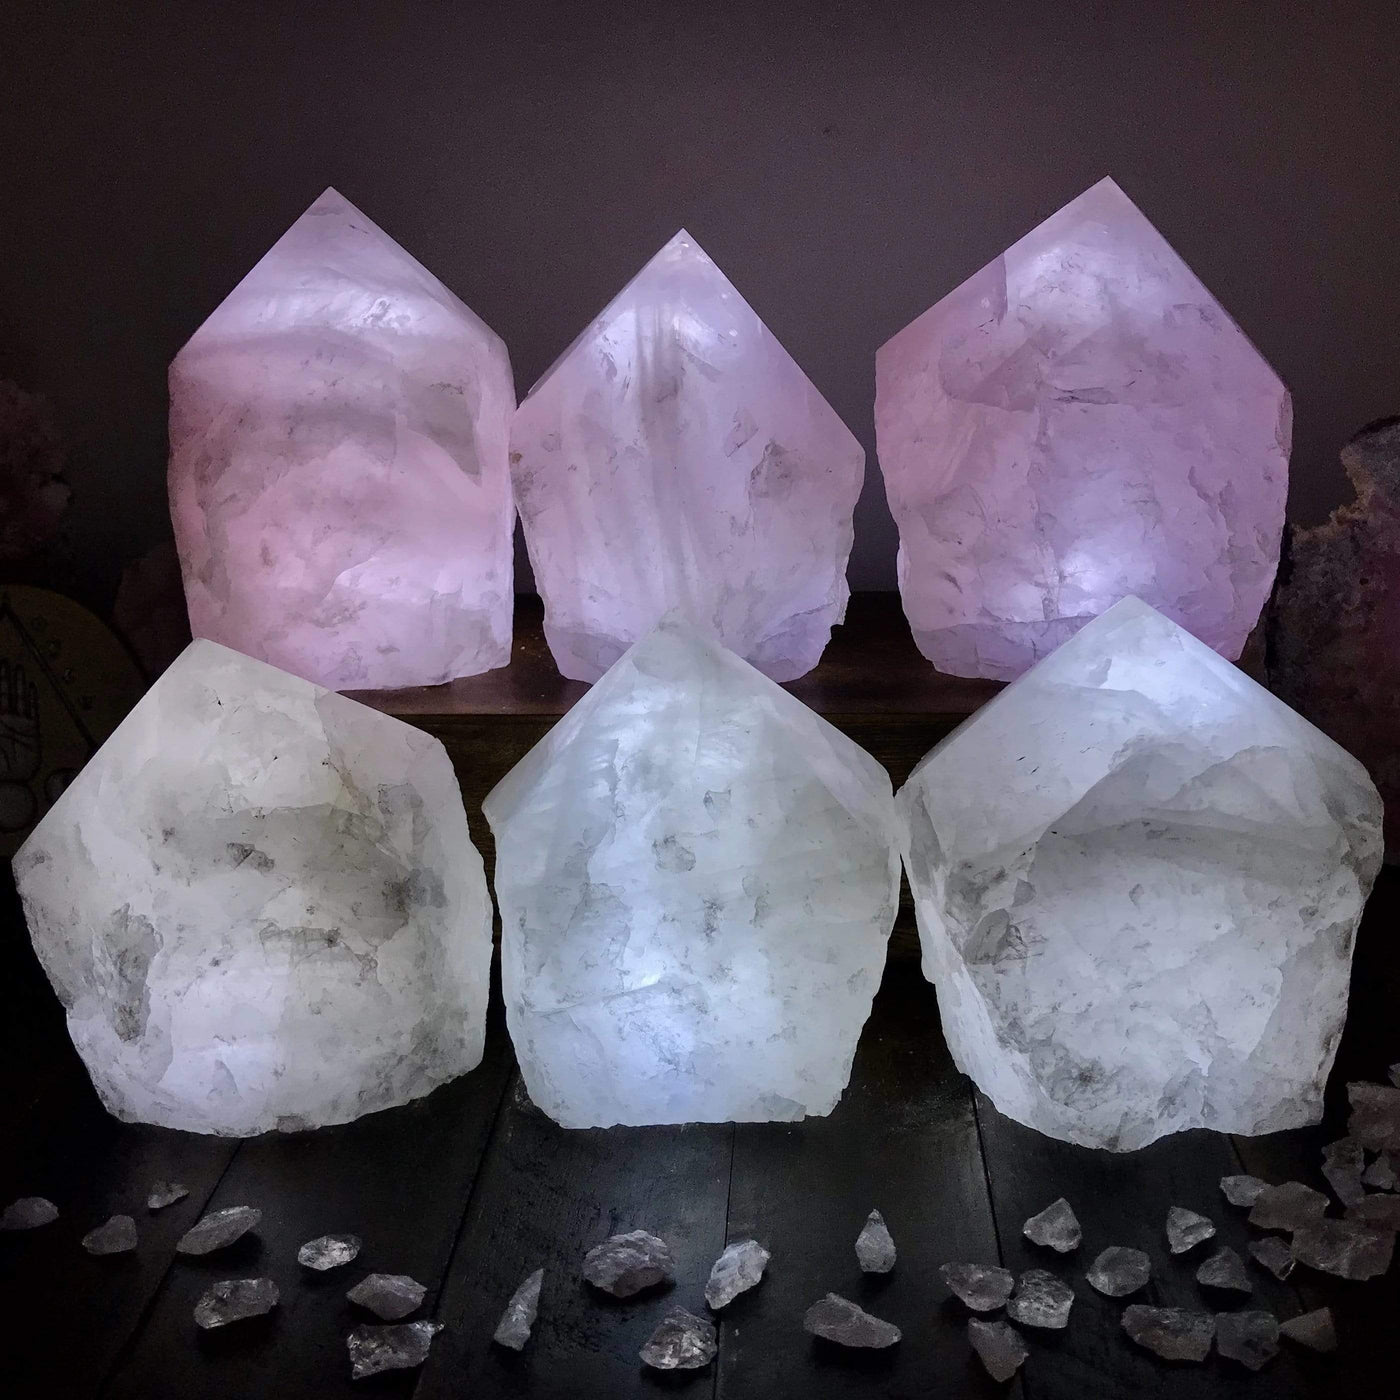 6 Rose Quartz and Crystal Lamps lit up in a dark room with other crystals as decoration